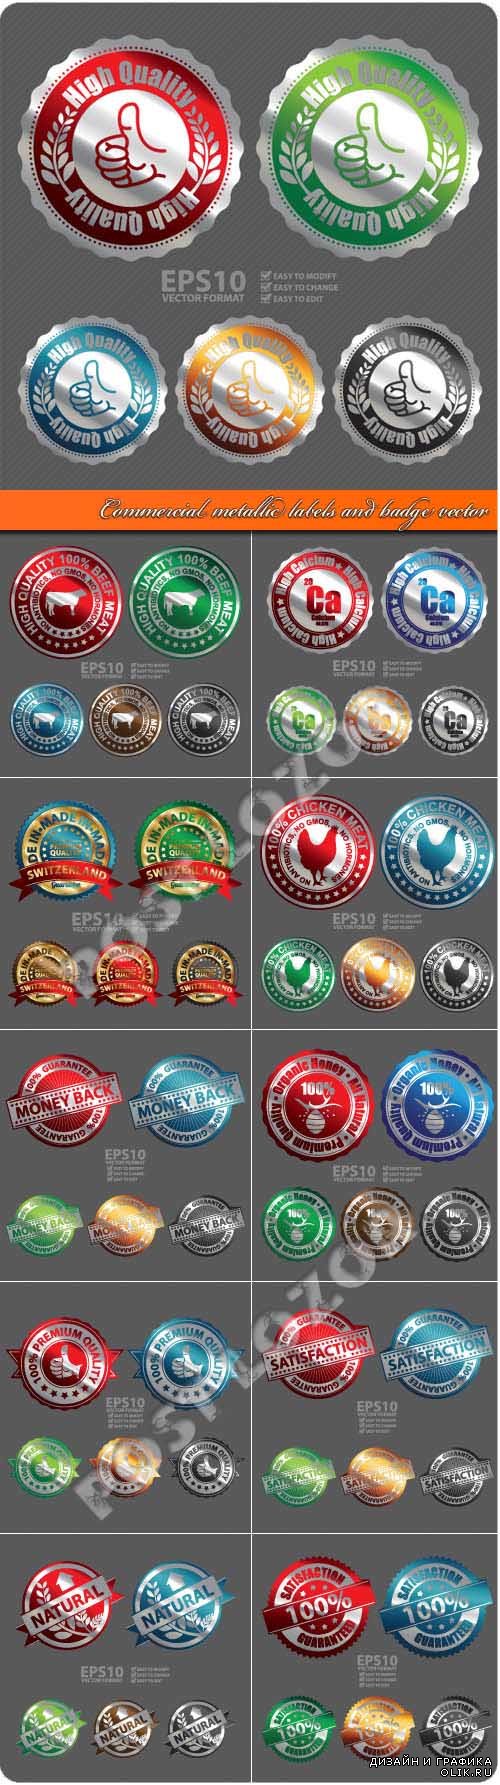 Commercial metallic labels and badge vector